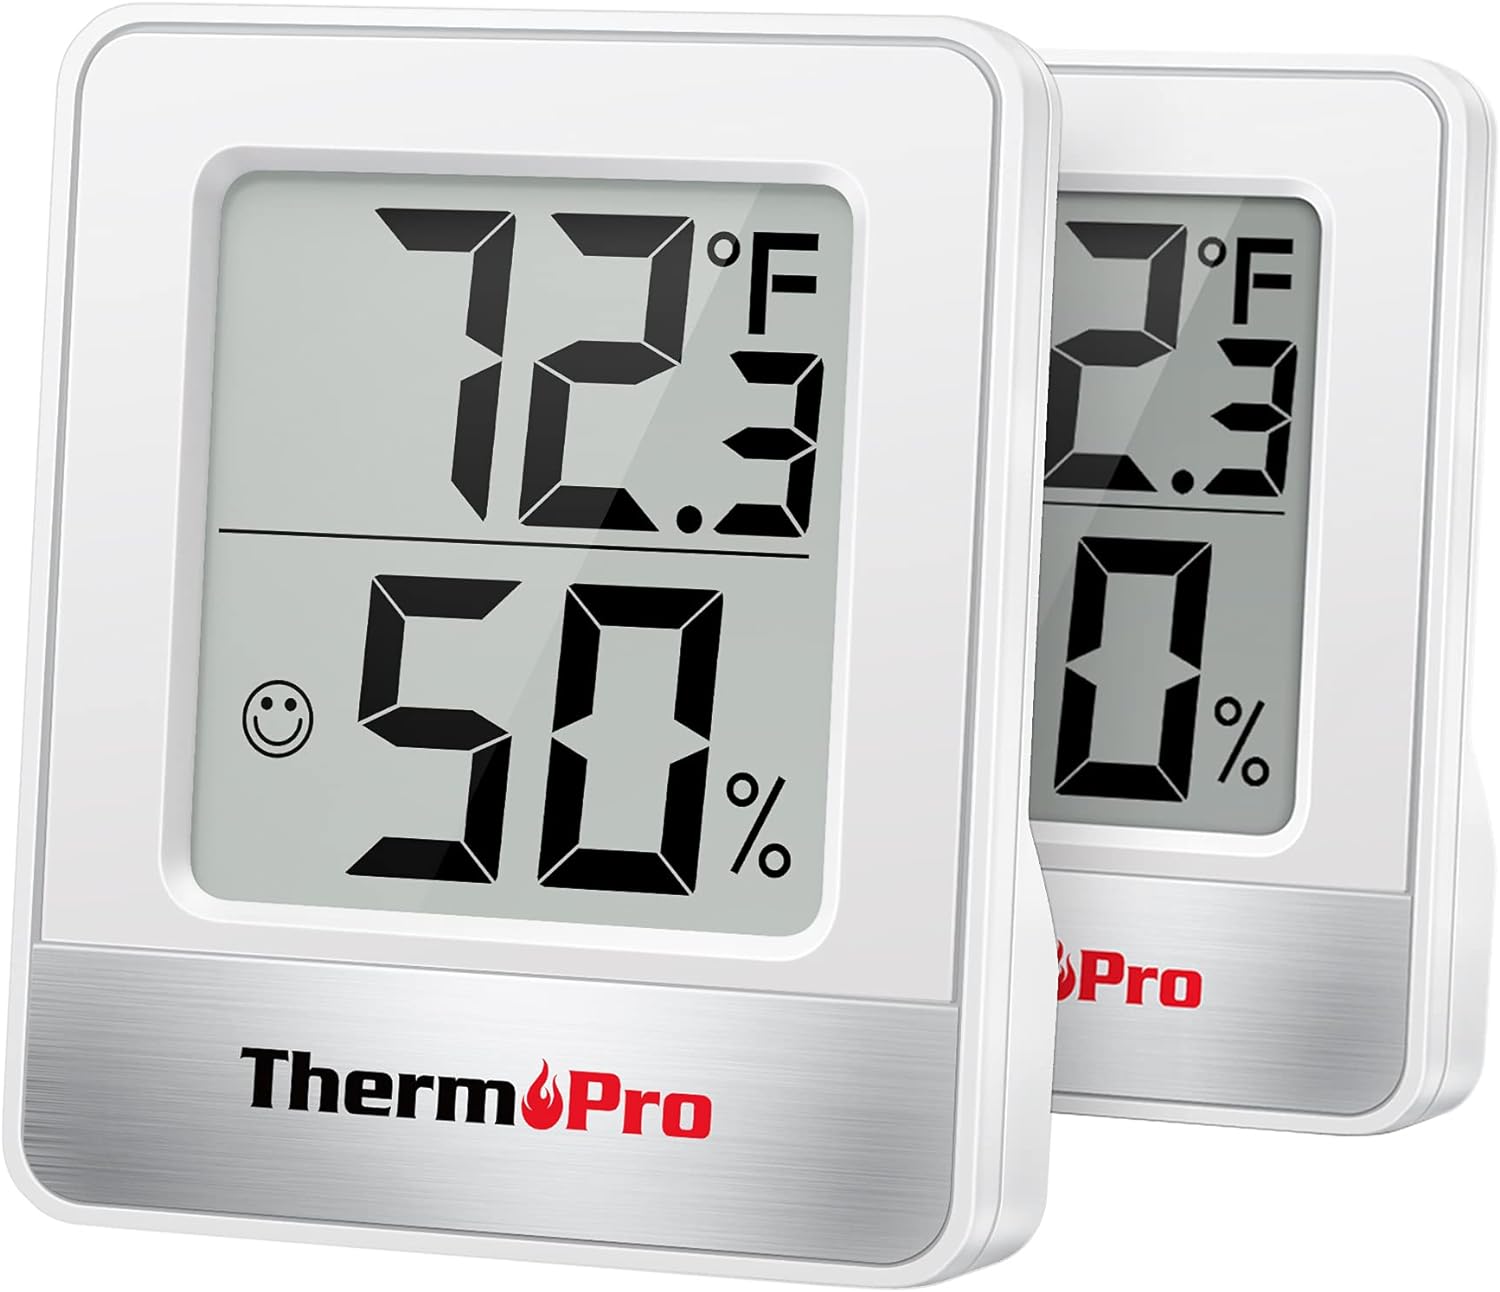 ThermoPro TP49 Digital Hygrometer Review